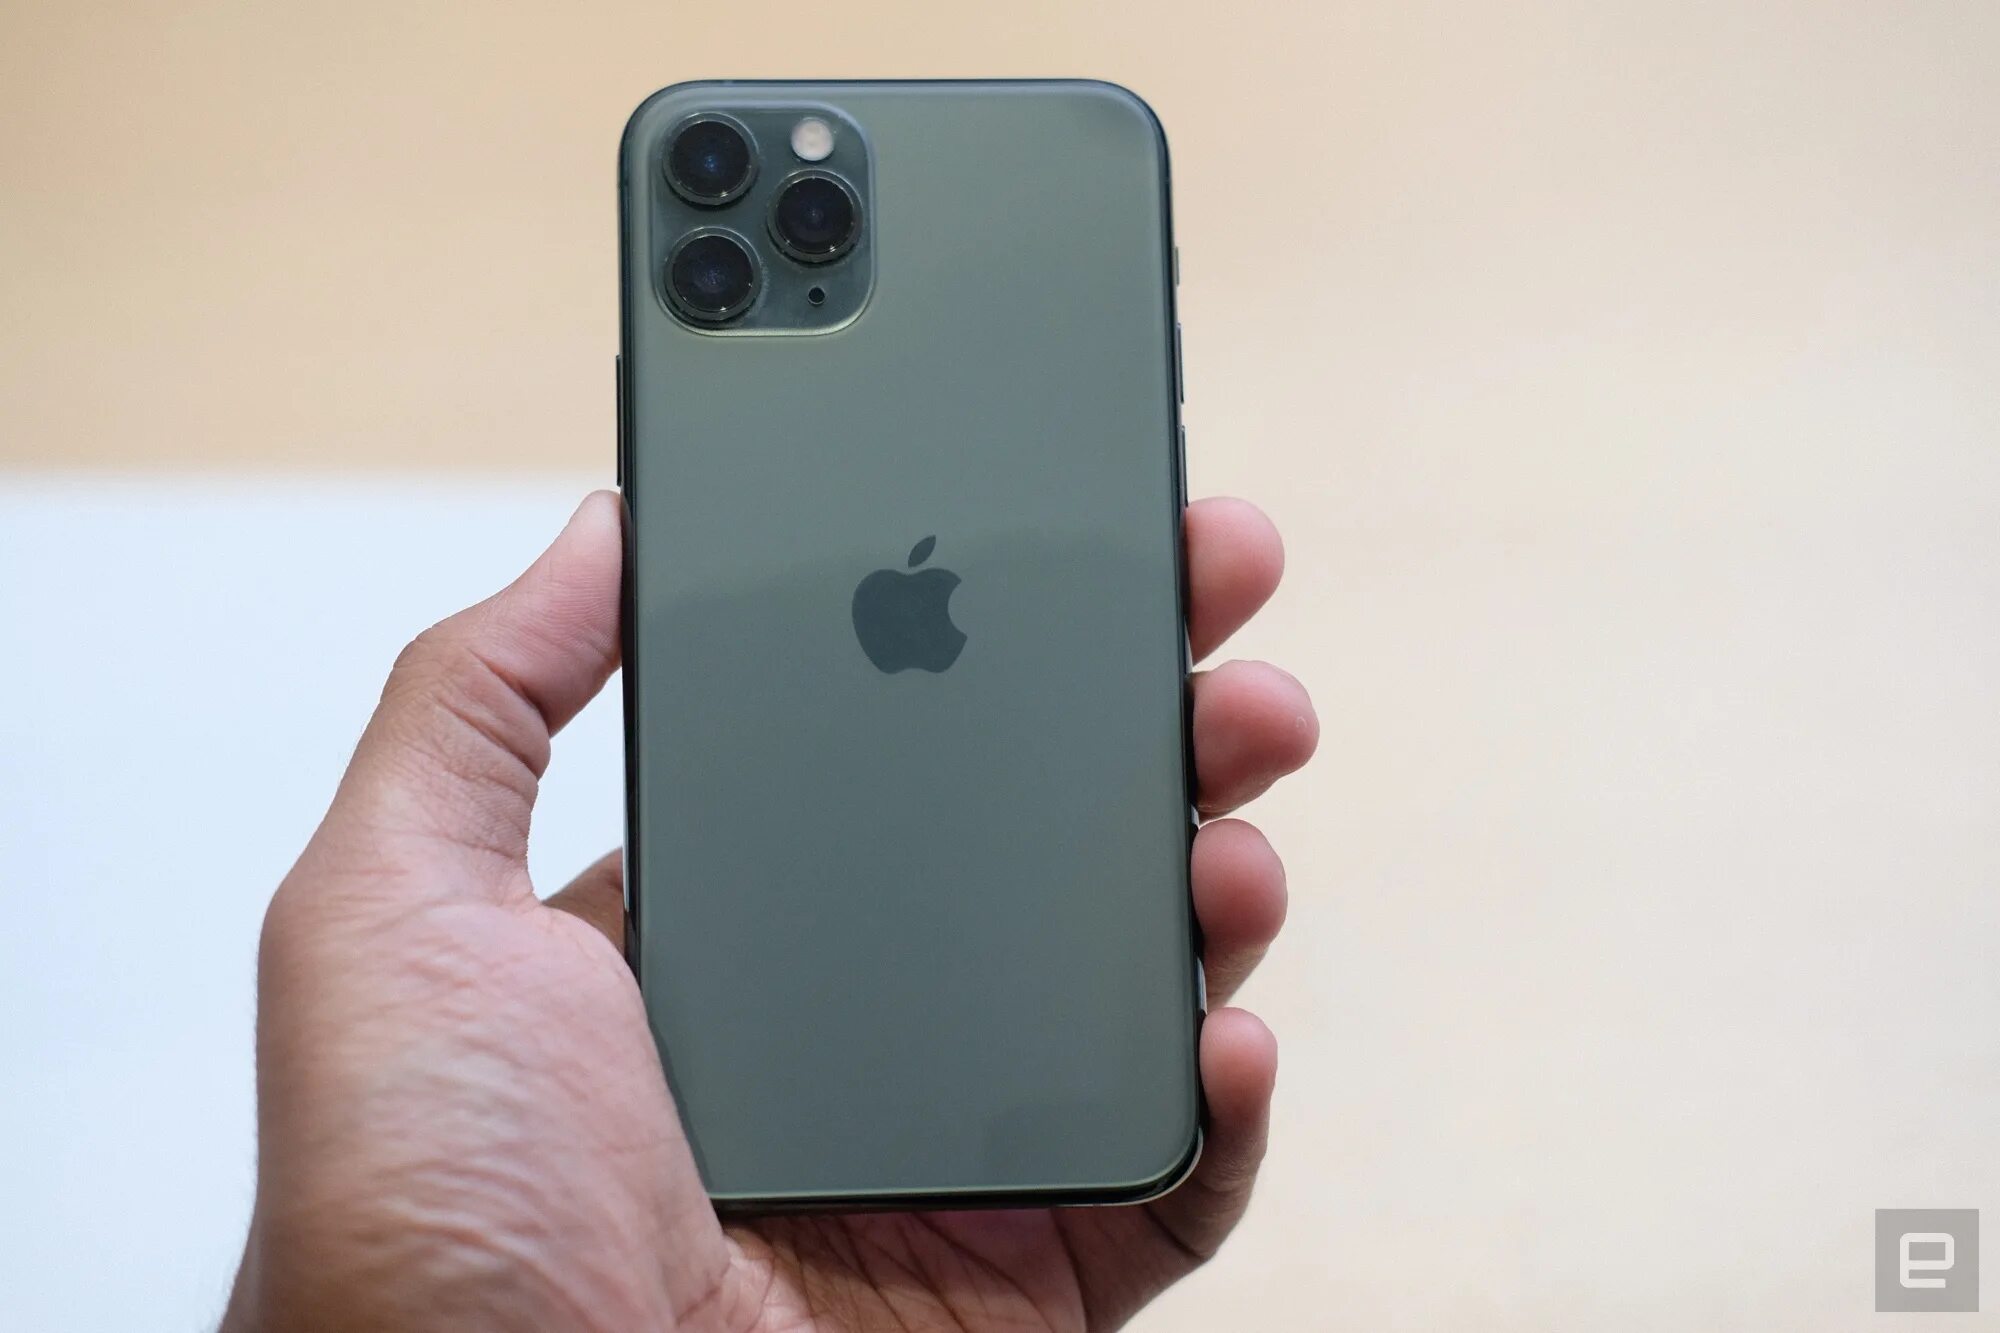 Iphone ones pro. Iphone 11 Pro Green. Iphone 11 Pro Pro Max. Iphone 11 Pro Space Grey. Iphone 11 Pro Max Green.